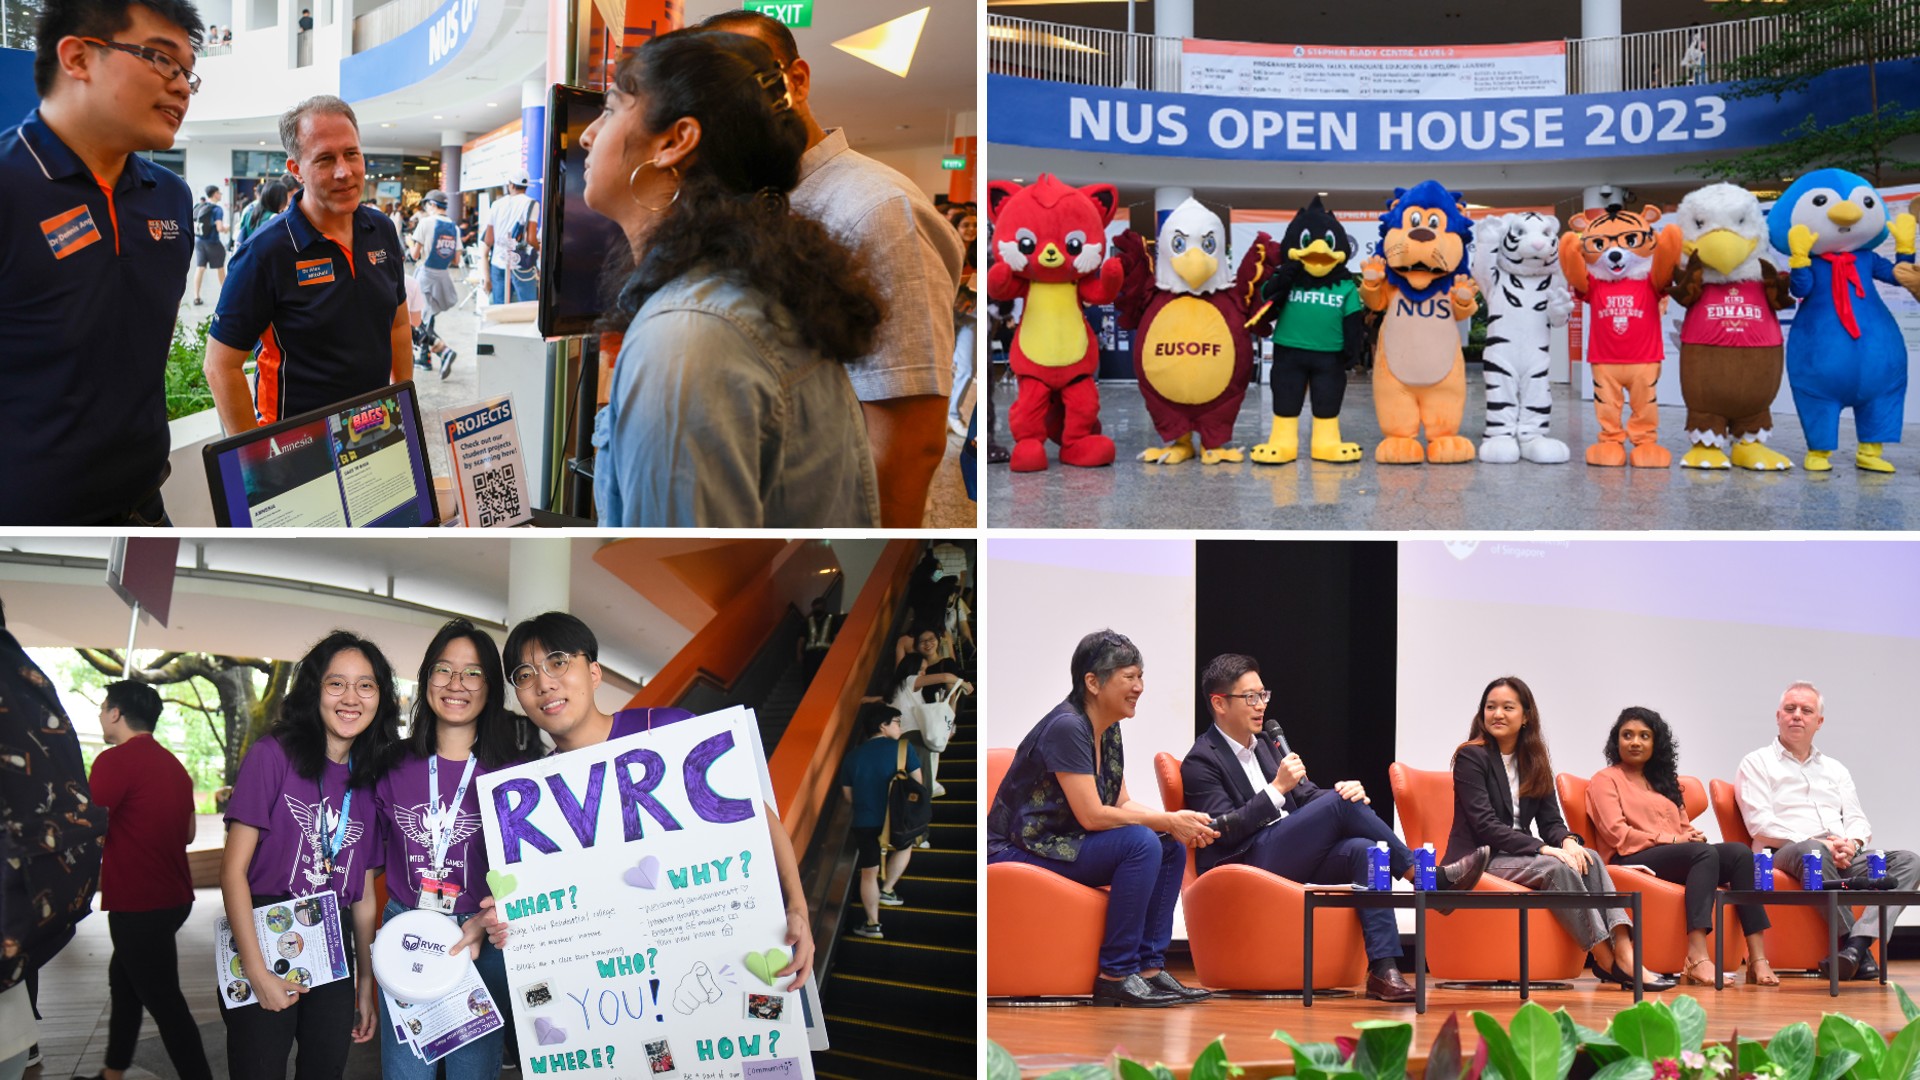 Prospective students gained insights from faculty members about the academic programmes, attended informative talks and special classes, toured campus facilities, and discovered NUS’ student life and residential experiences at the on-campus Open House.